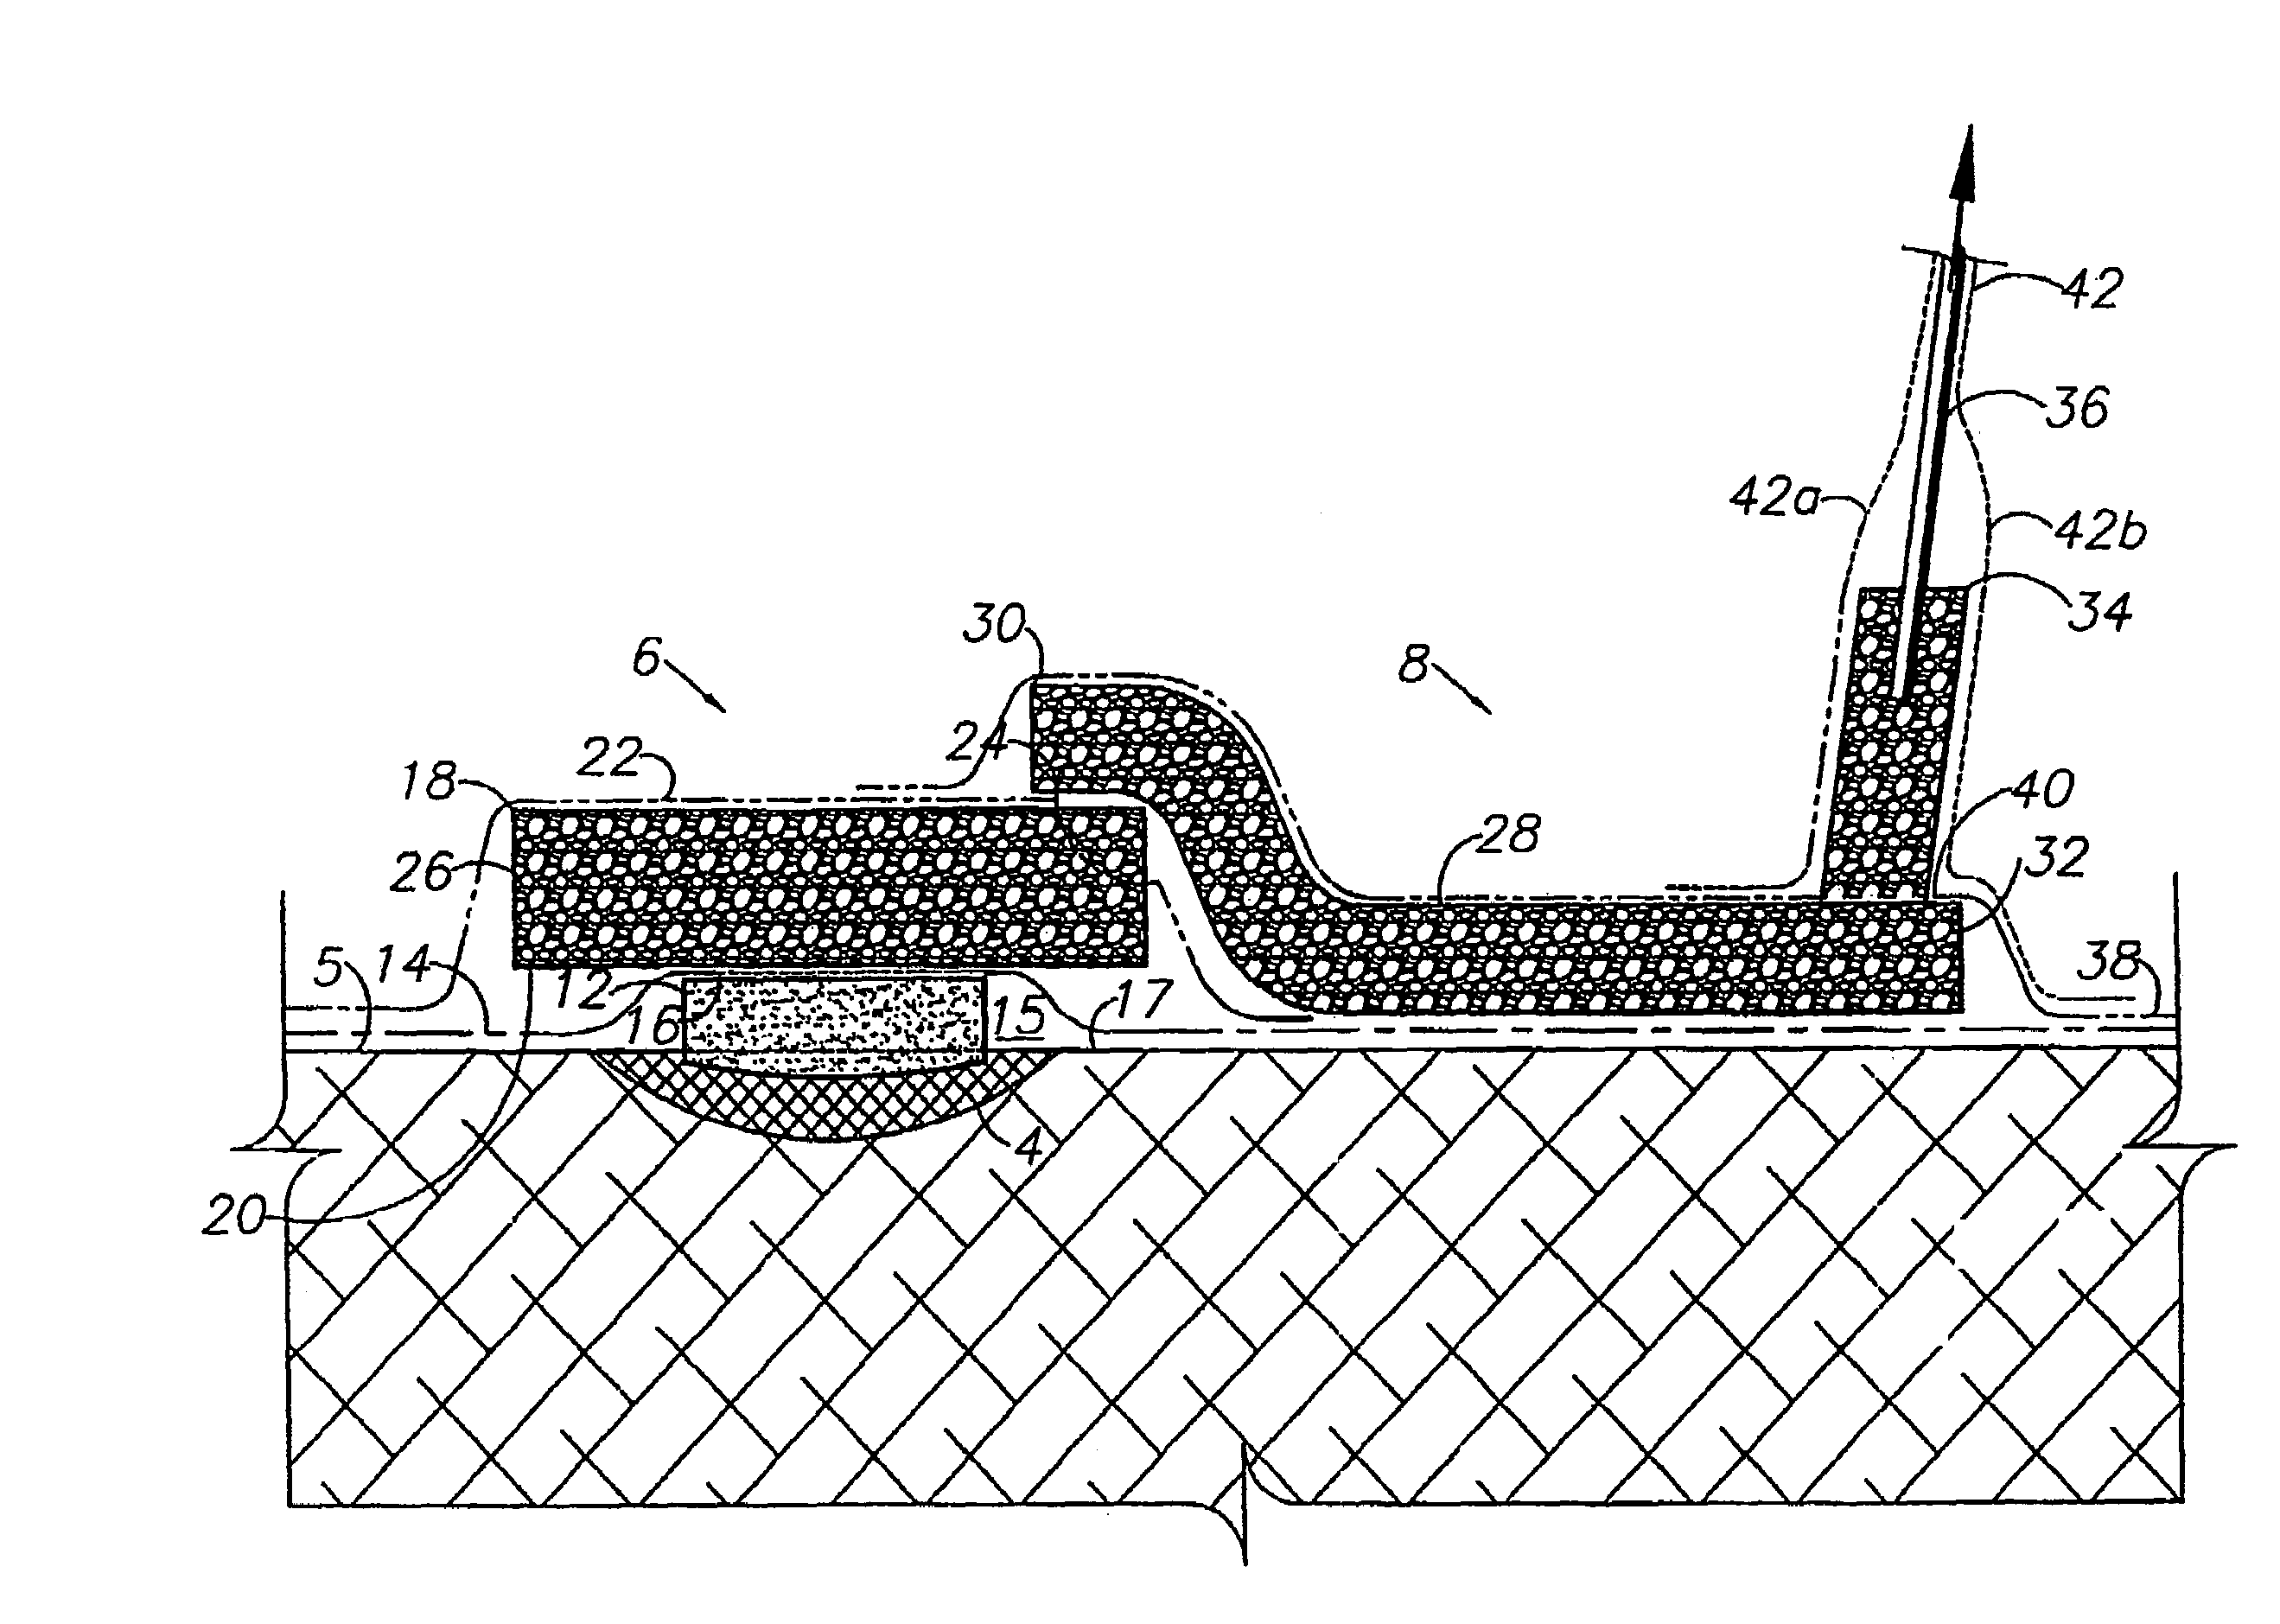 Wound therapy and tissue management system and method with fluid differentiation